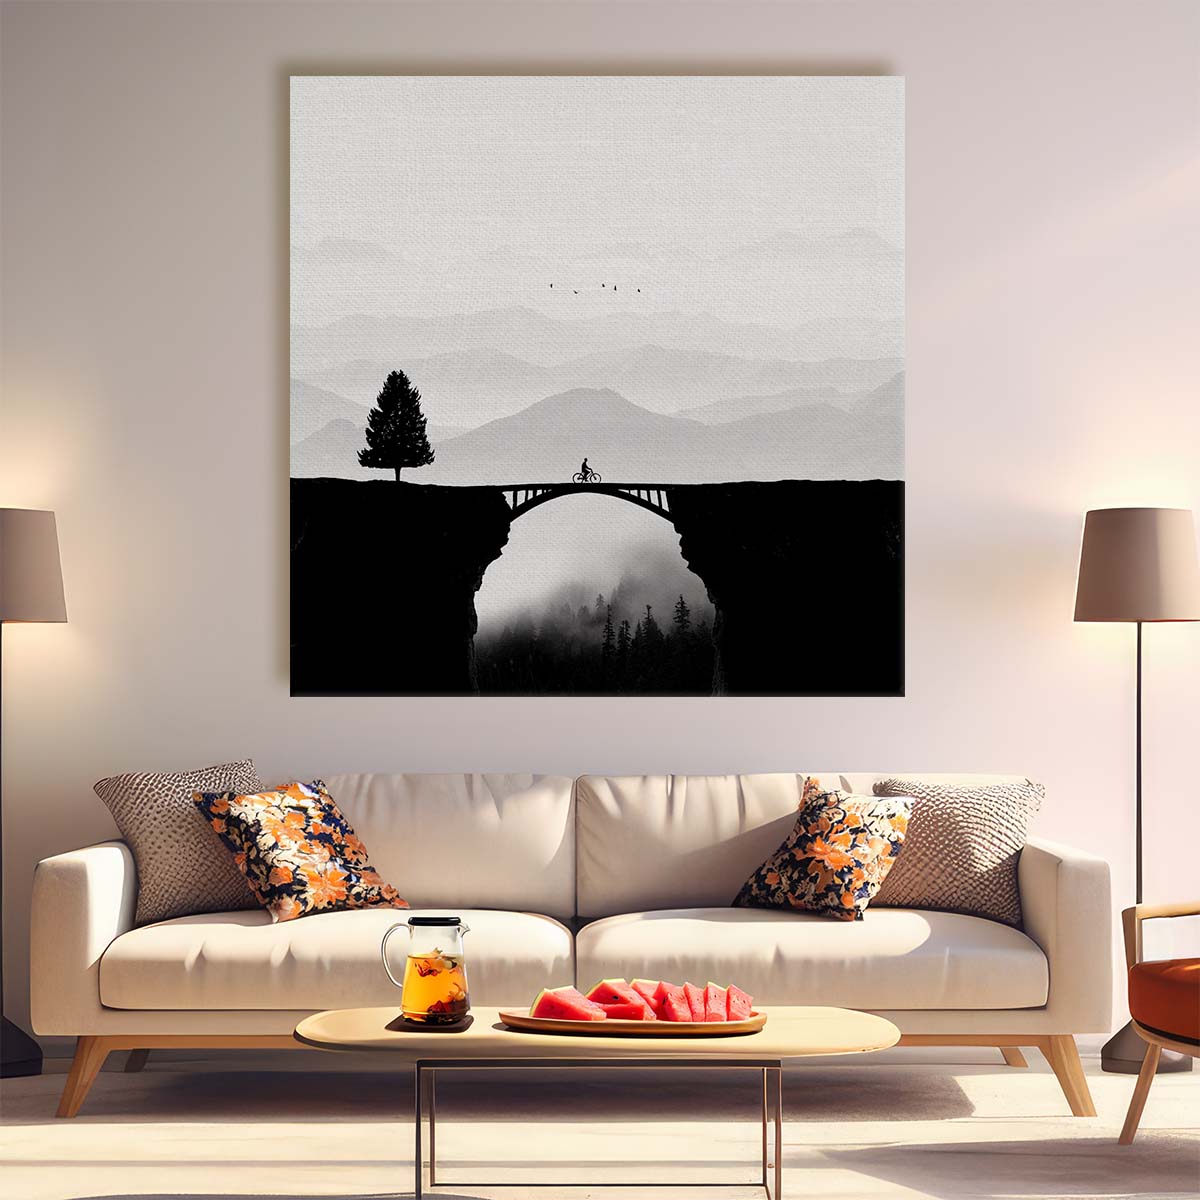 Misty Mountain Bike Adventure in Monochrome Landscape Photography Wall Art by Luxuriance Designs. Made in USA.